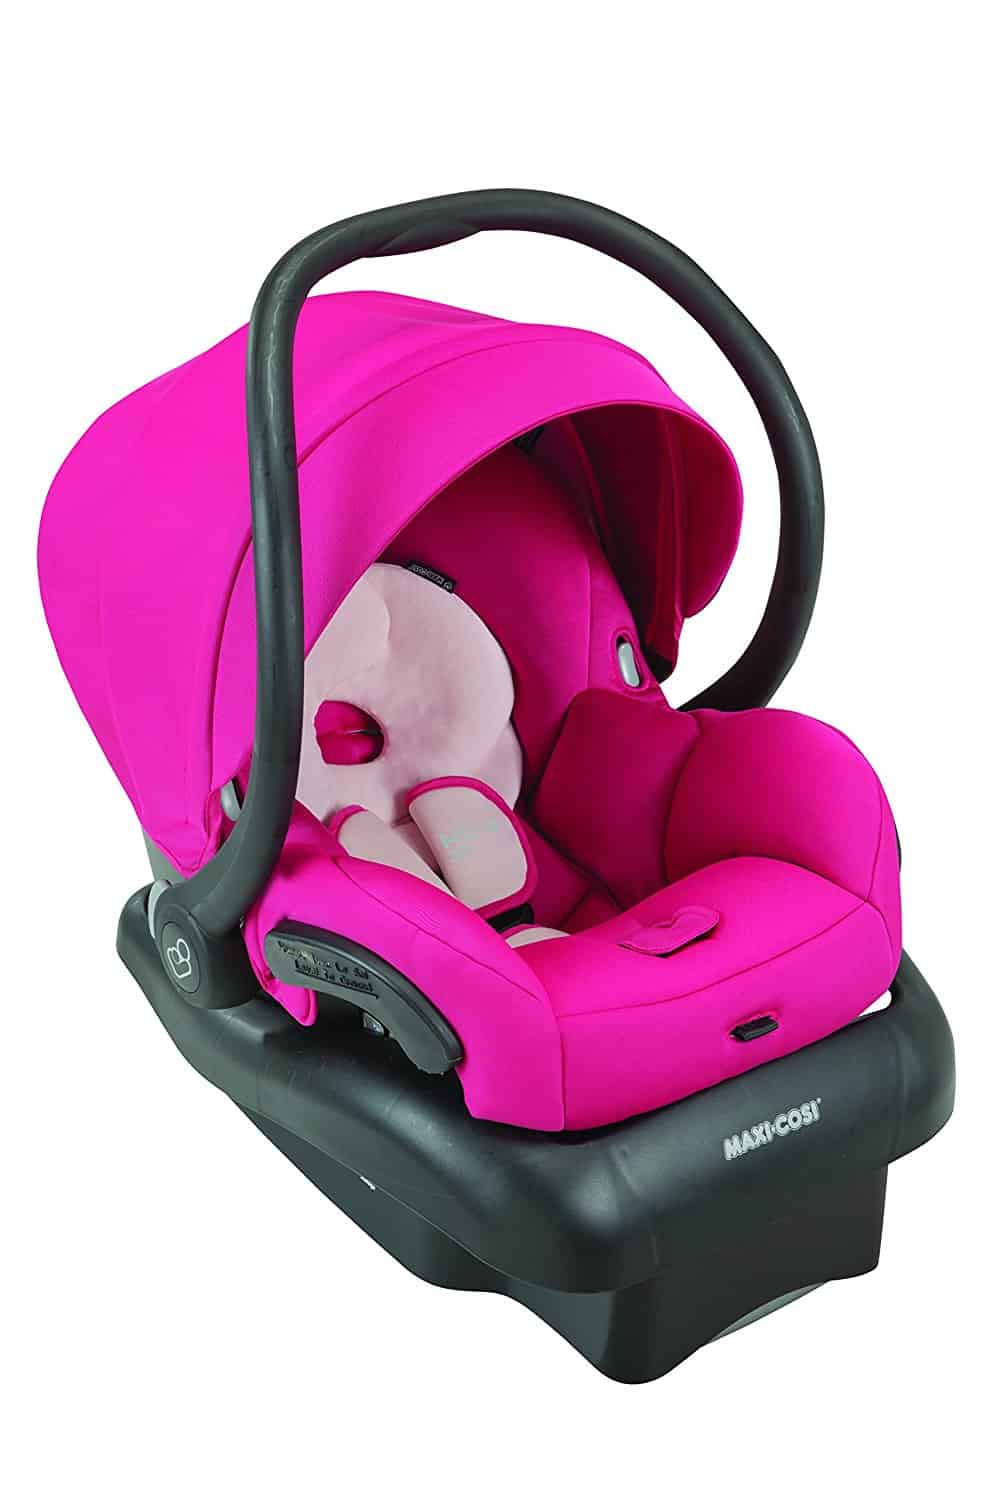 Infant Car Seat Review Maxi Cosi Mico 30 Max Baby Bargains - Infant Car Seat Weight Limit Maxi Cosi